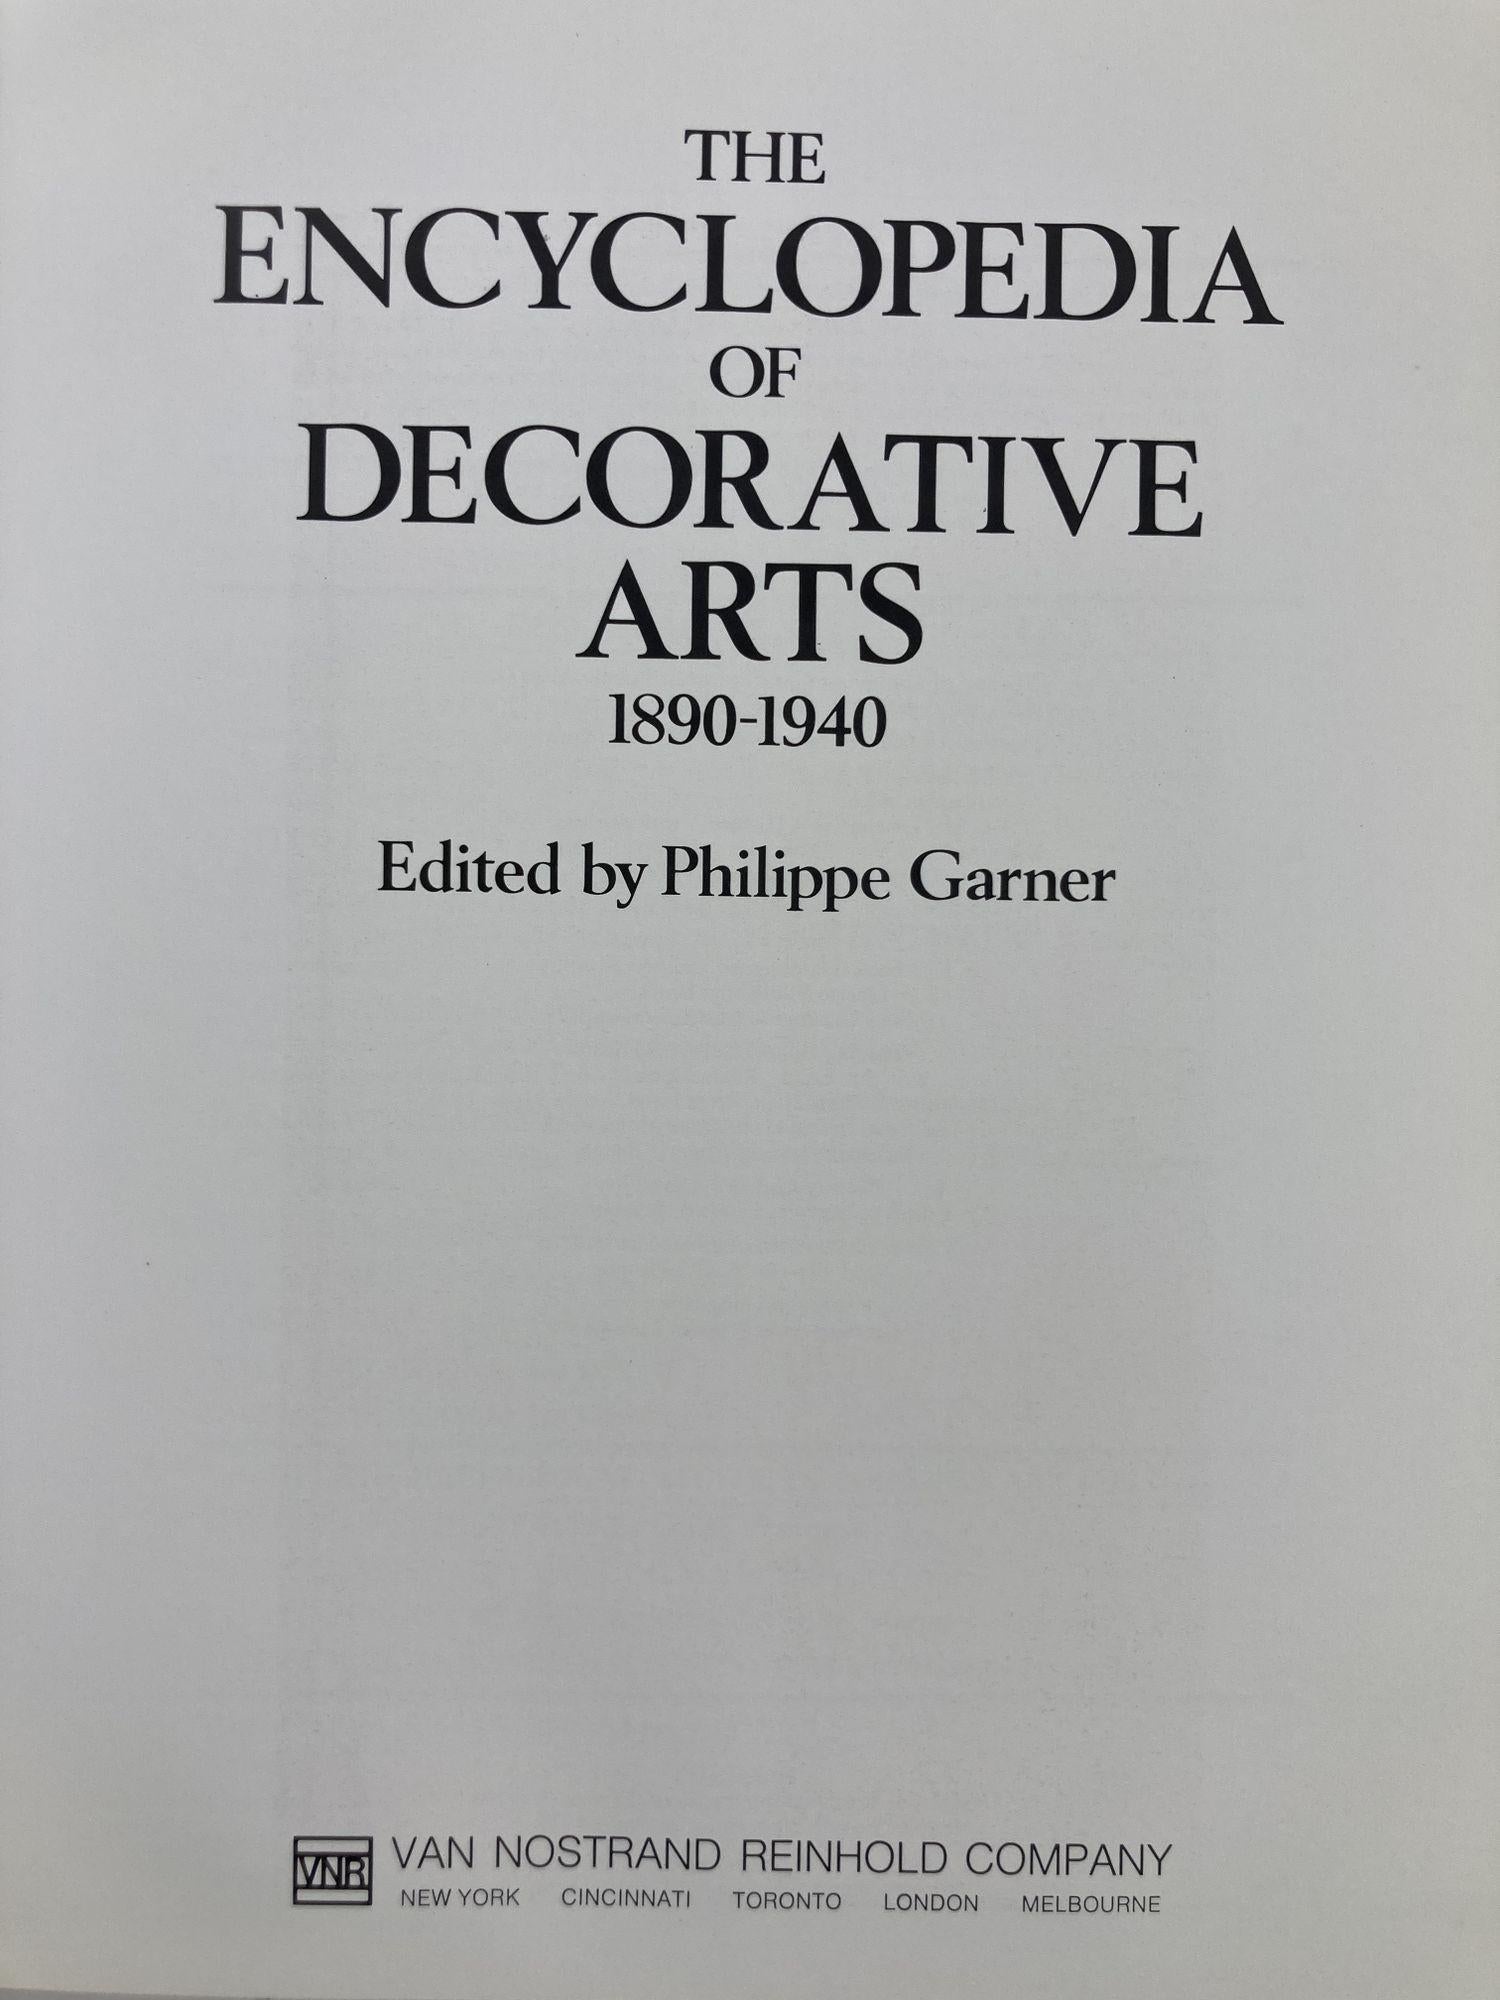 Encyclopedia of Decorative Arts, 1890-1940 1st Edition 1978 For Sale 9